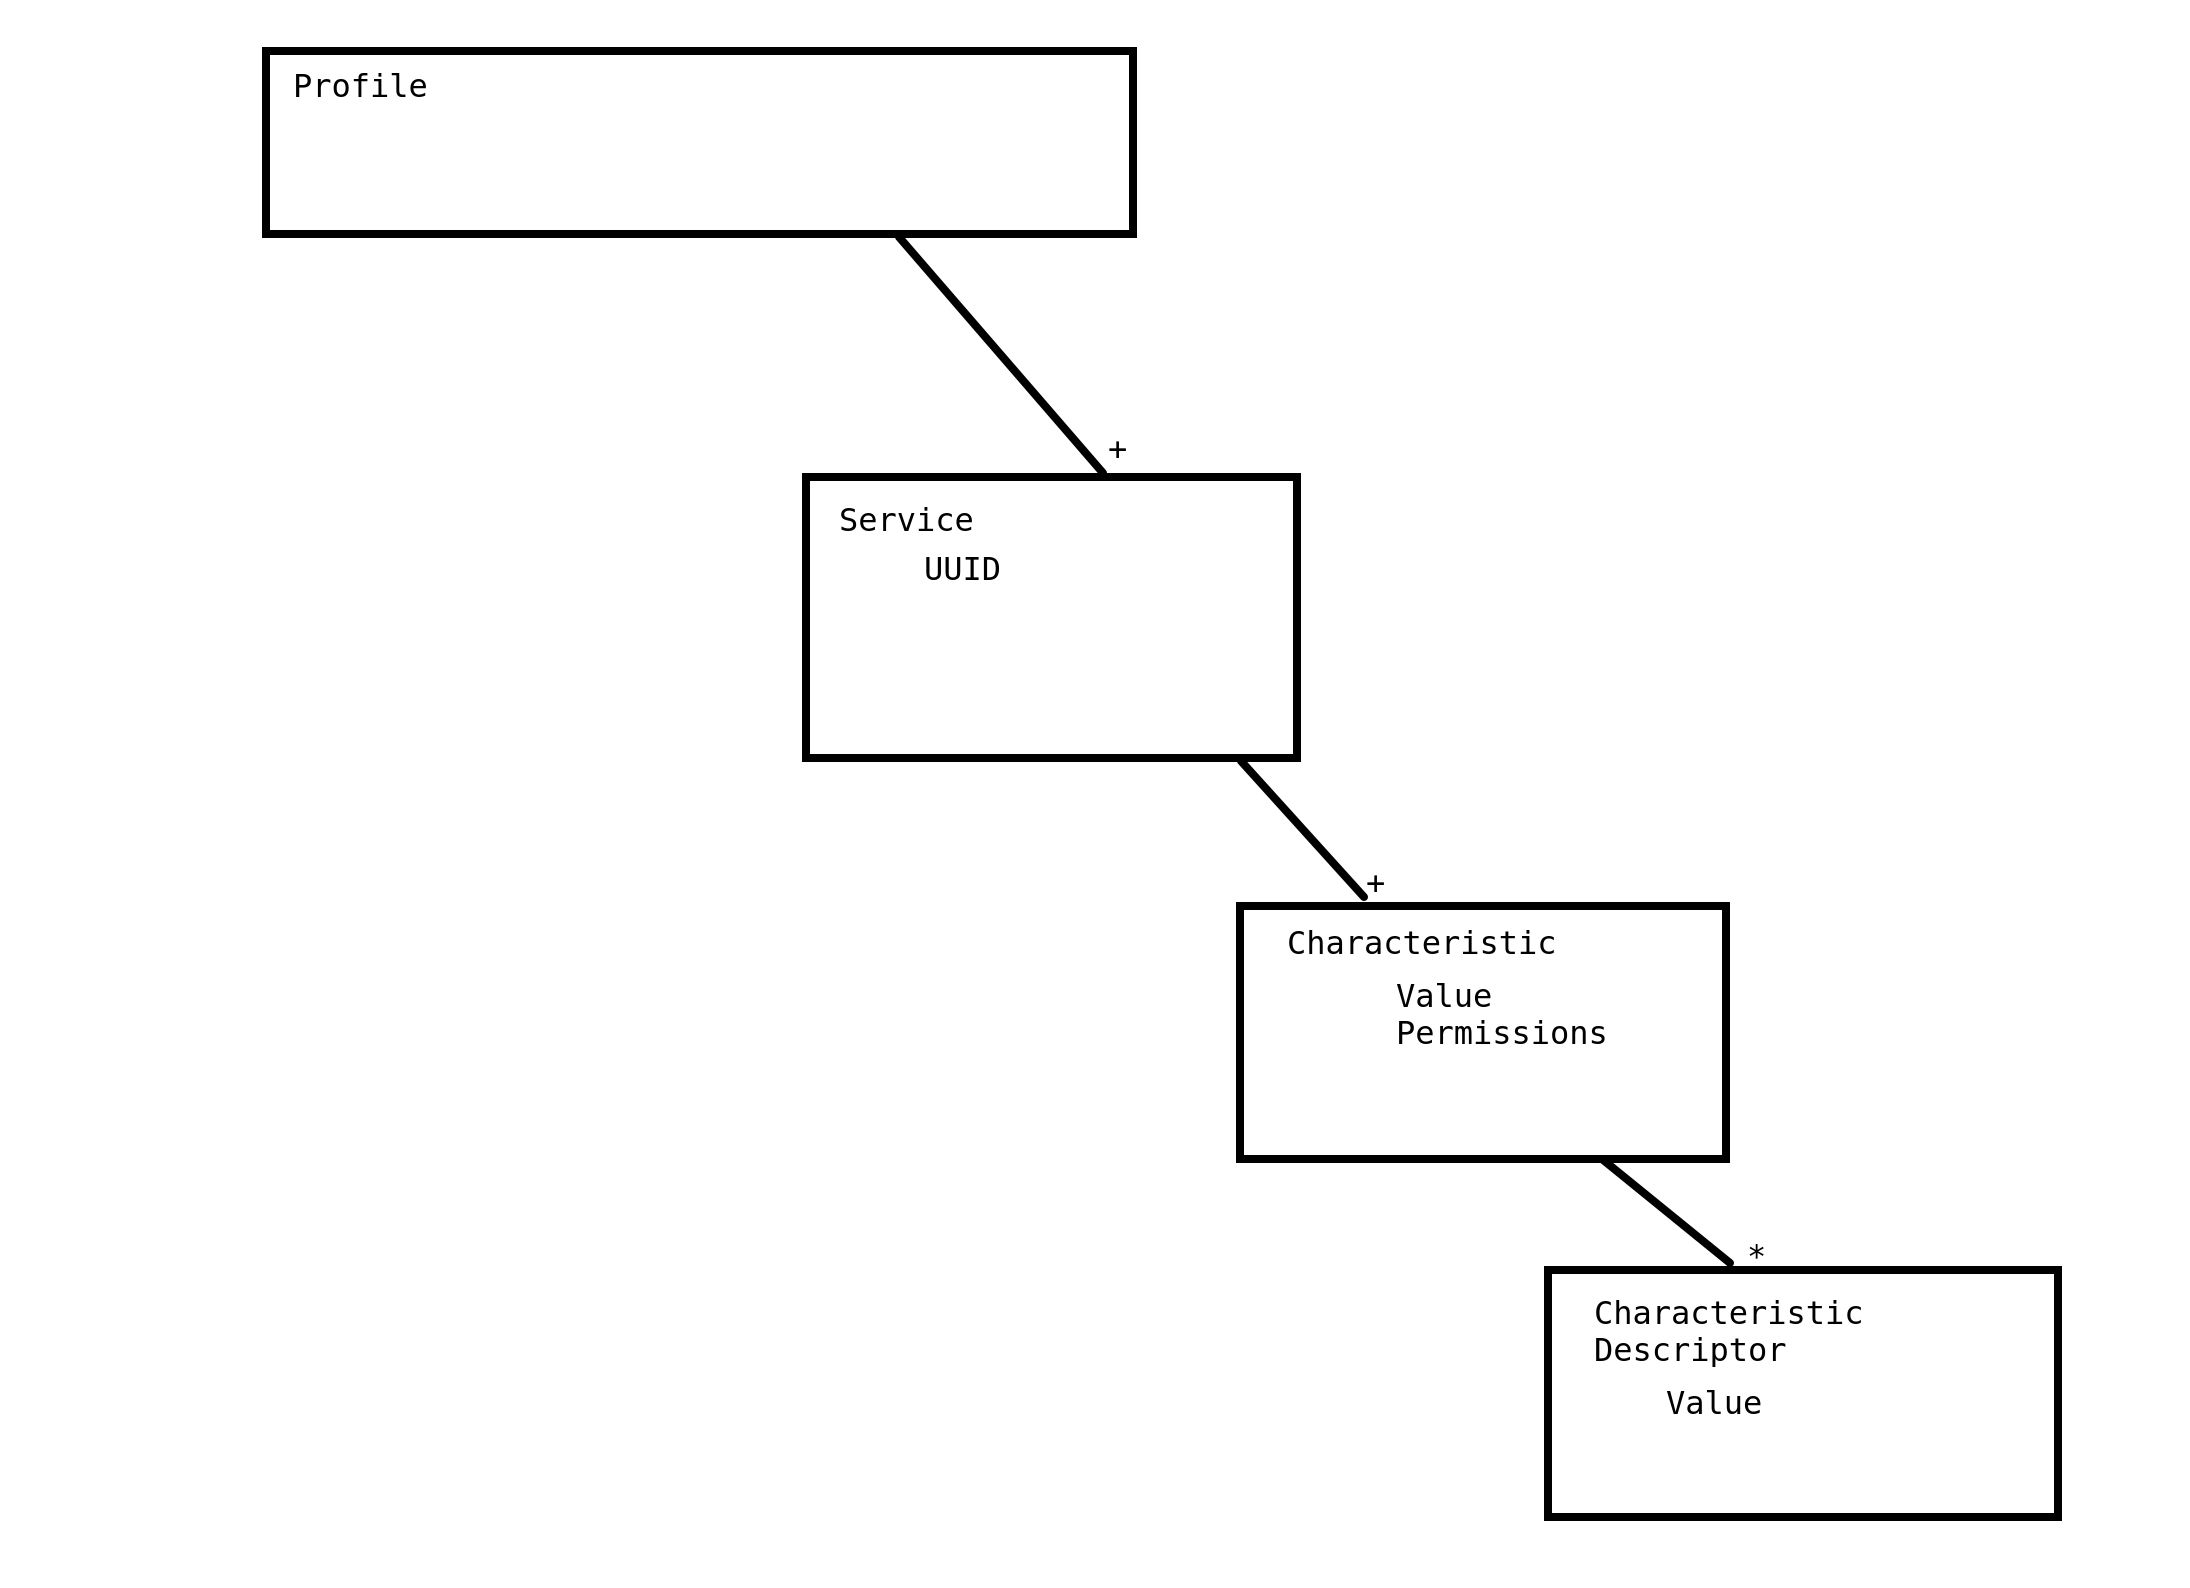 Simple diagram with boxes connected with lines. Profiles, services, characteristics, and characteristic descriptors are each a seperate box with a line between each